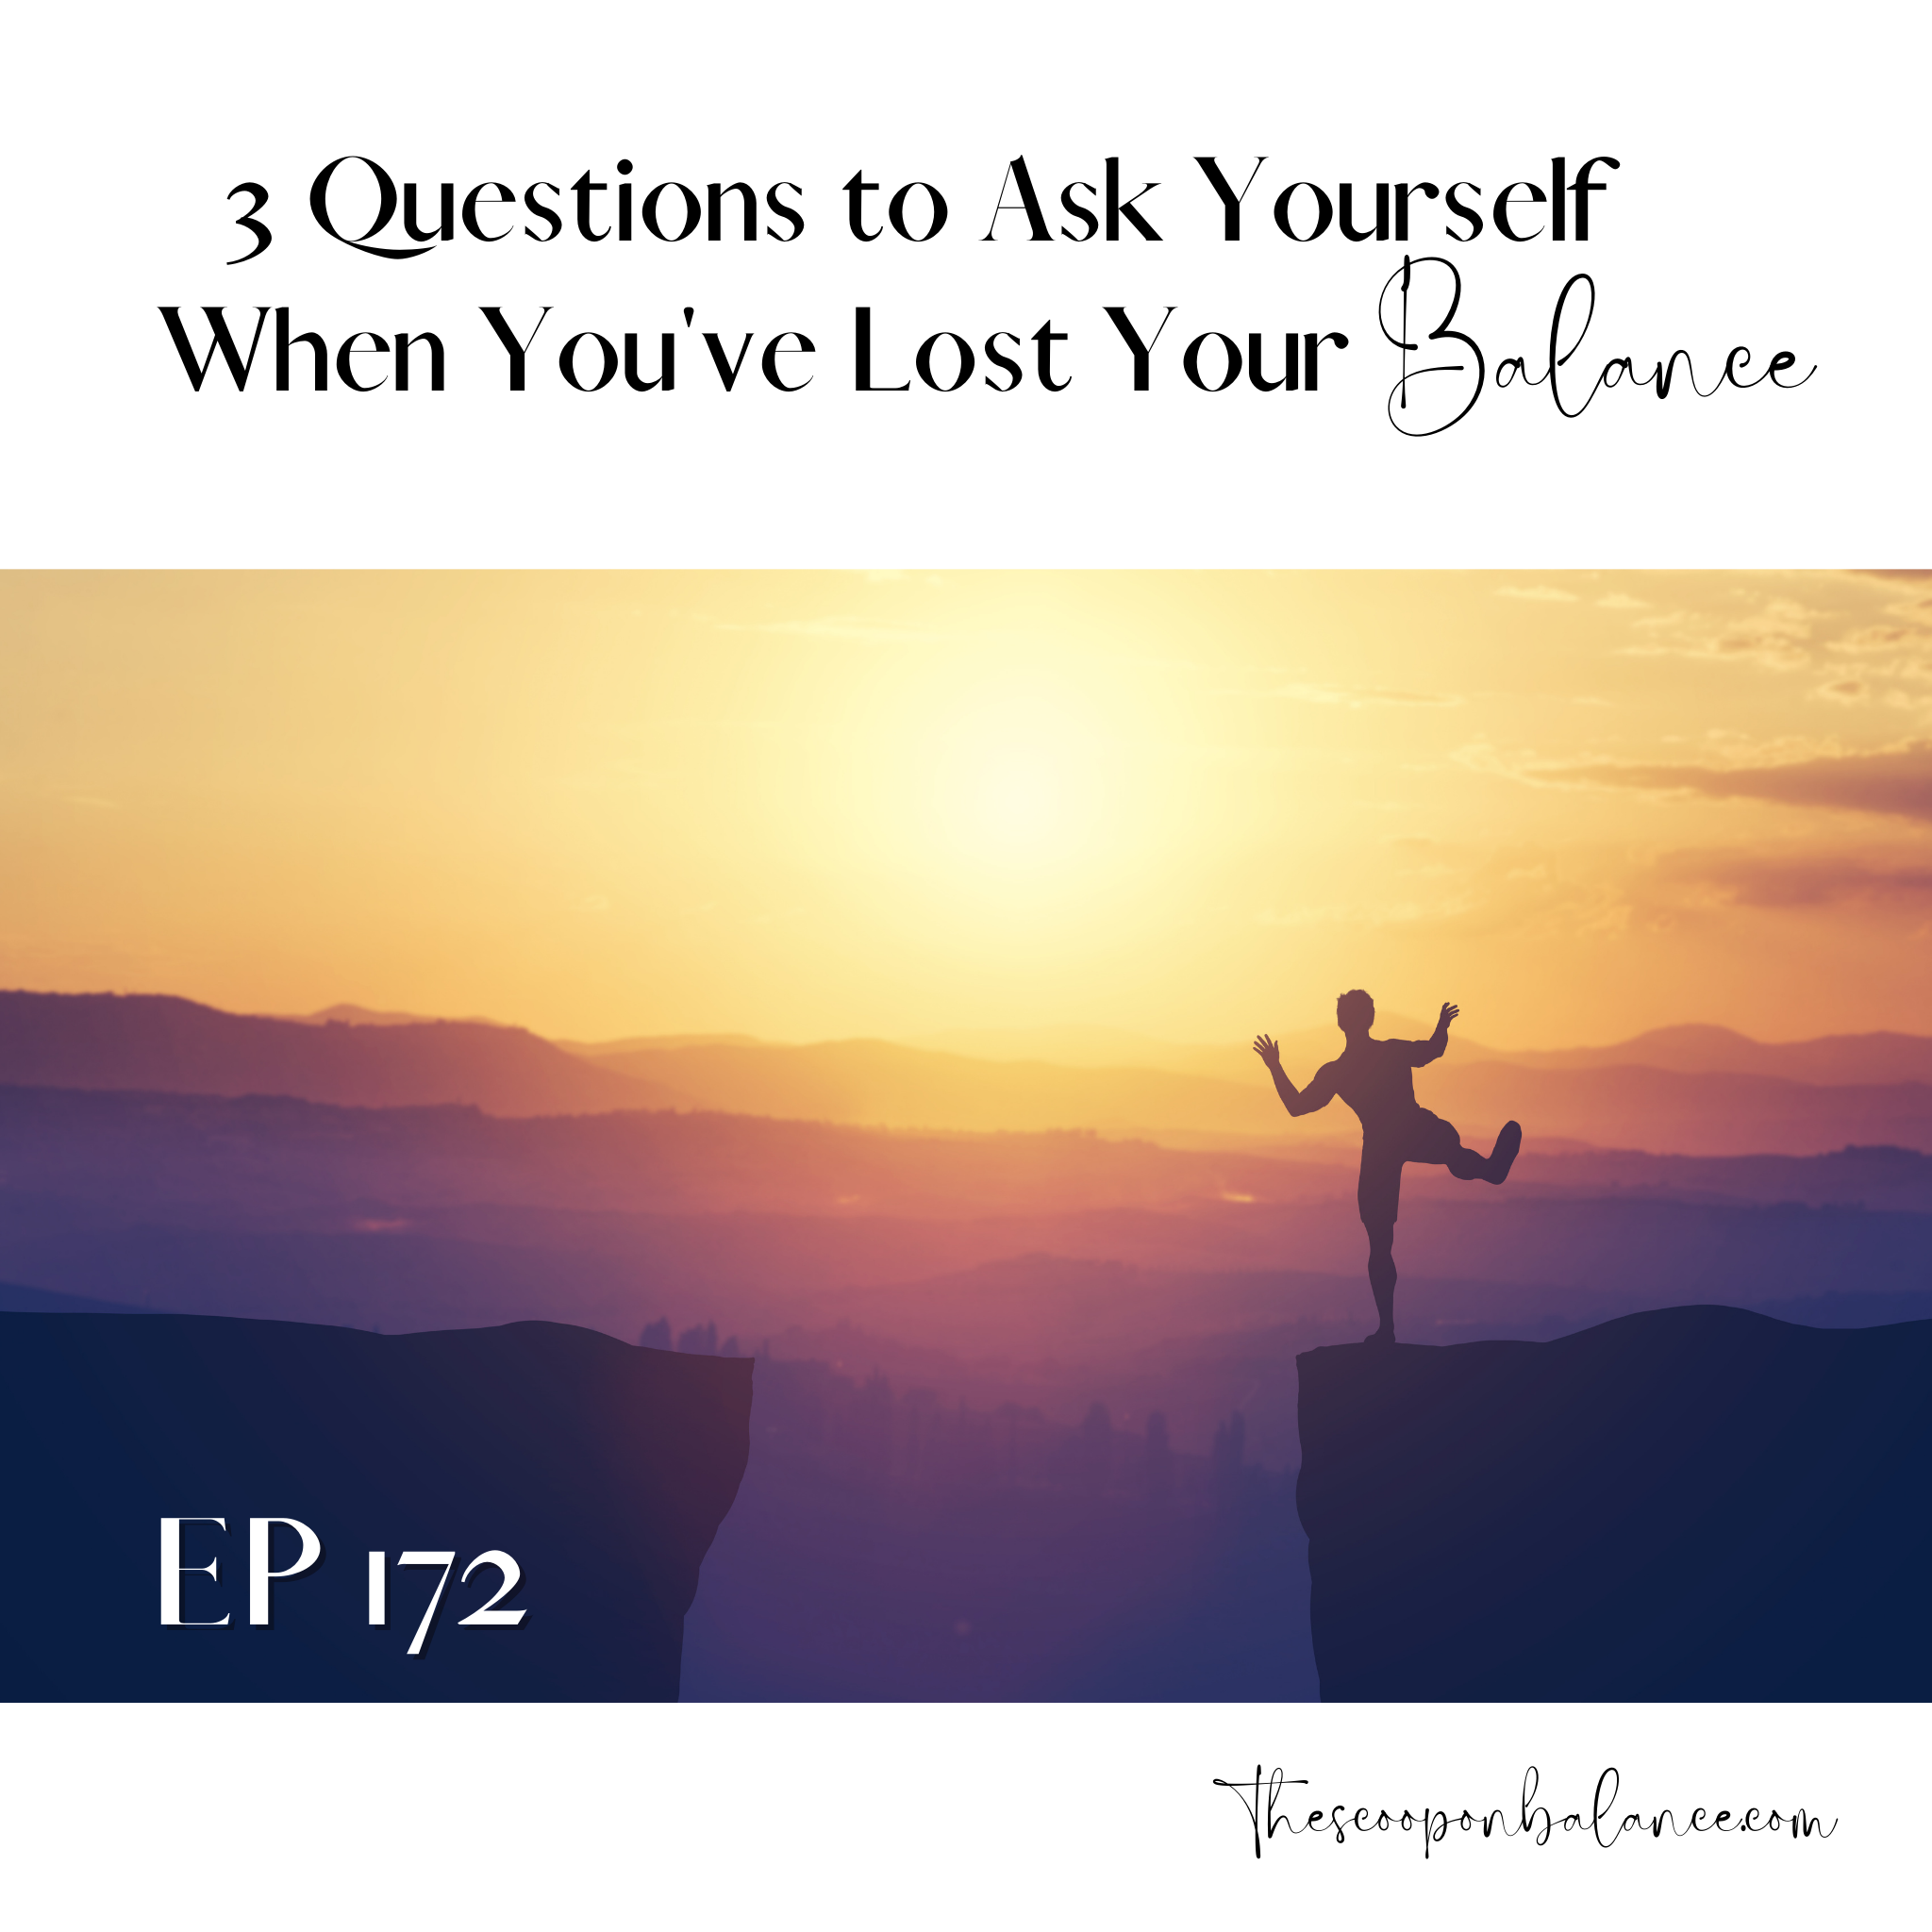 Ep 172: 3 Questions to Ask Yourself When You’ve Lost Your Balance